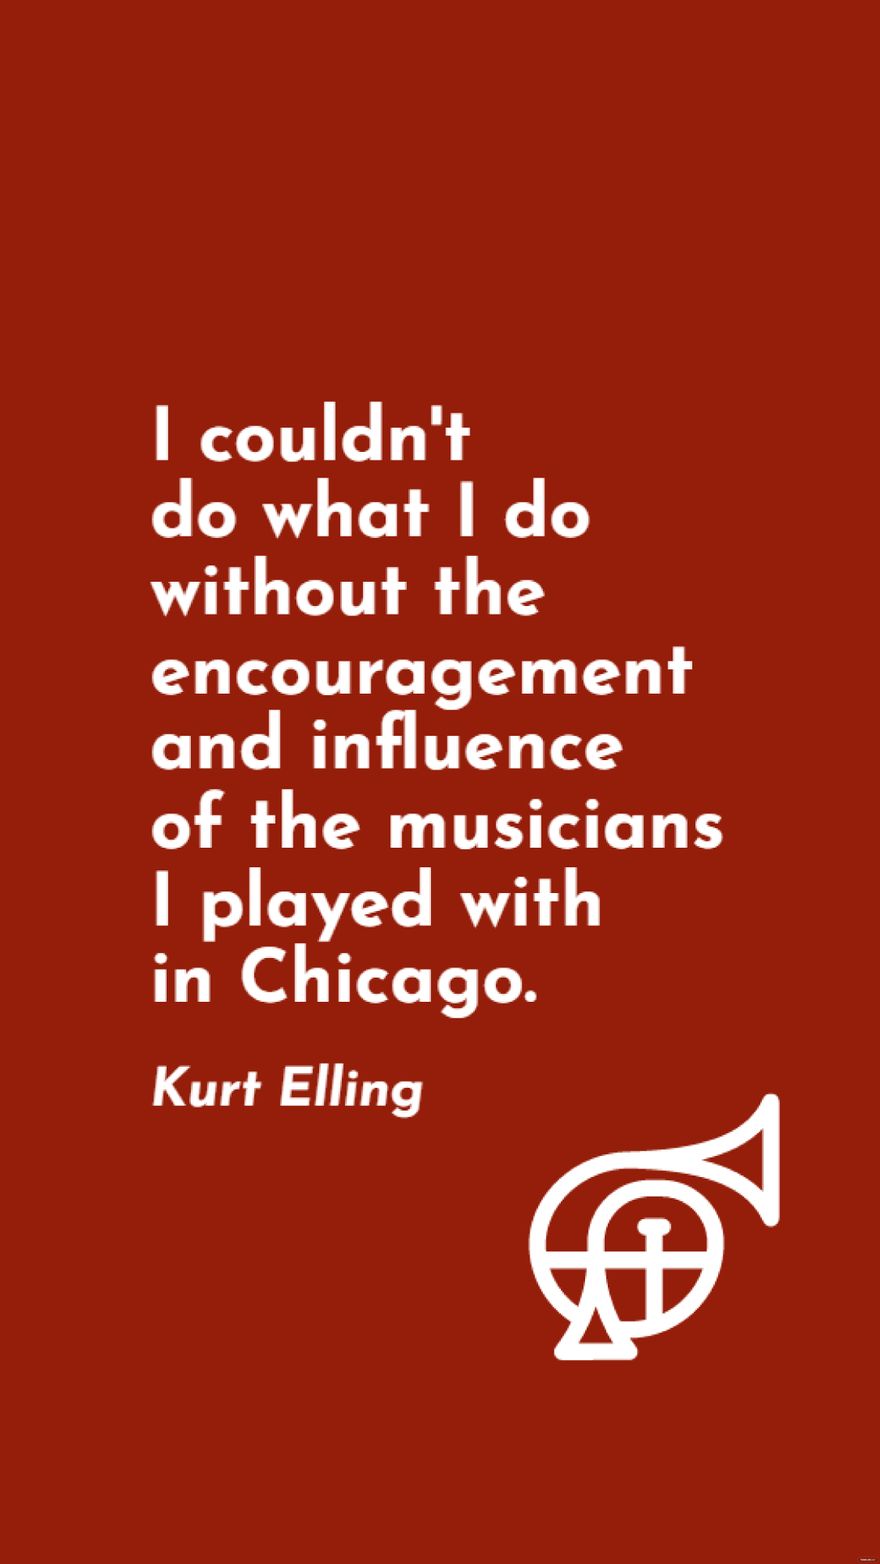 Kurt Elling - I couldn't do what I do without the encouragement and influence of the musicians I played with in Chicago.